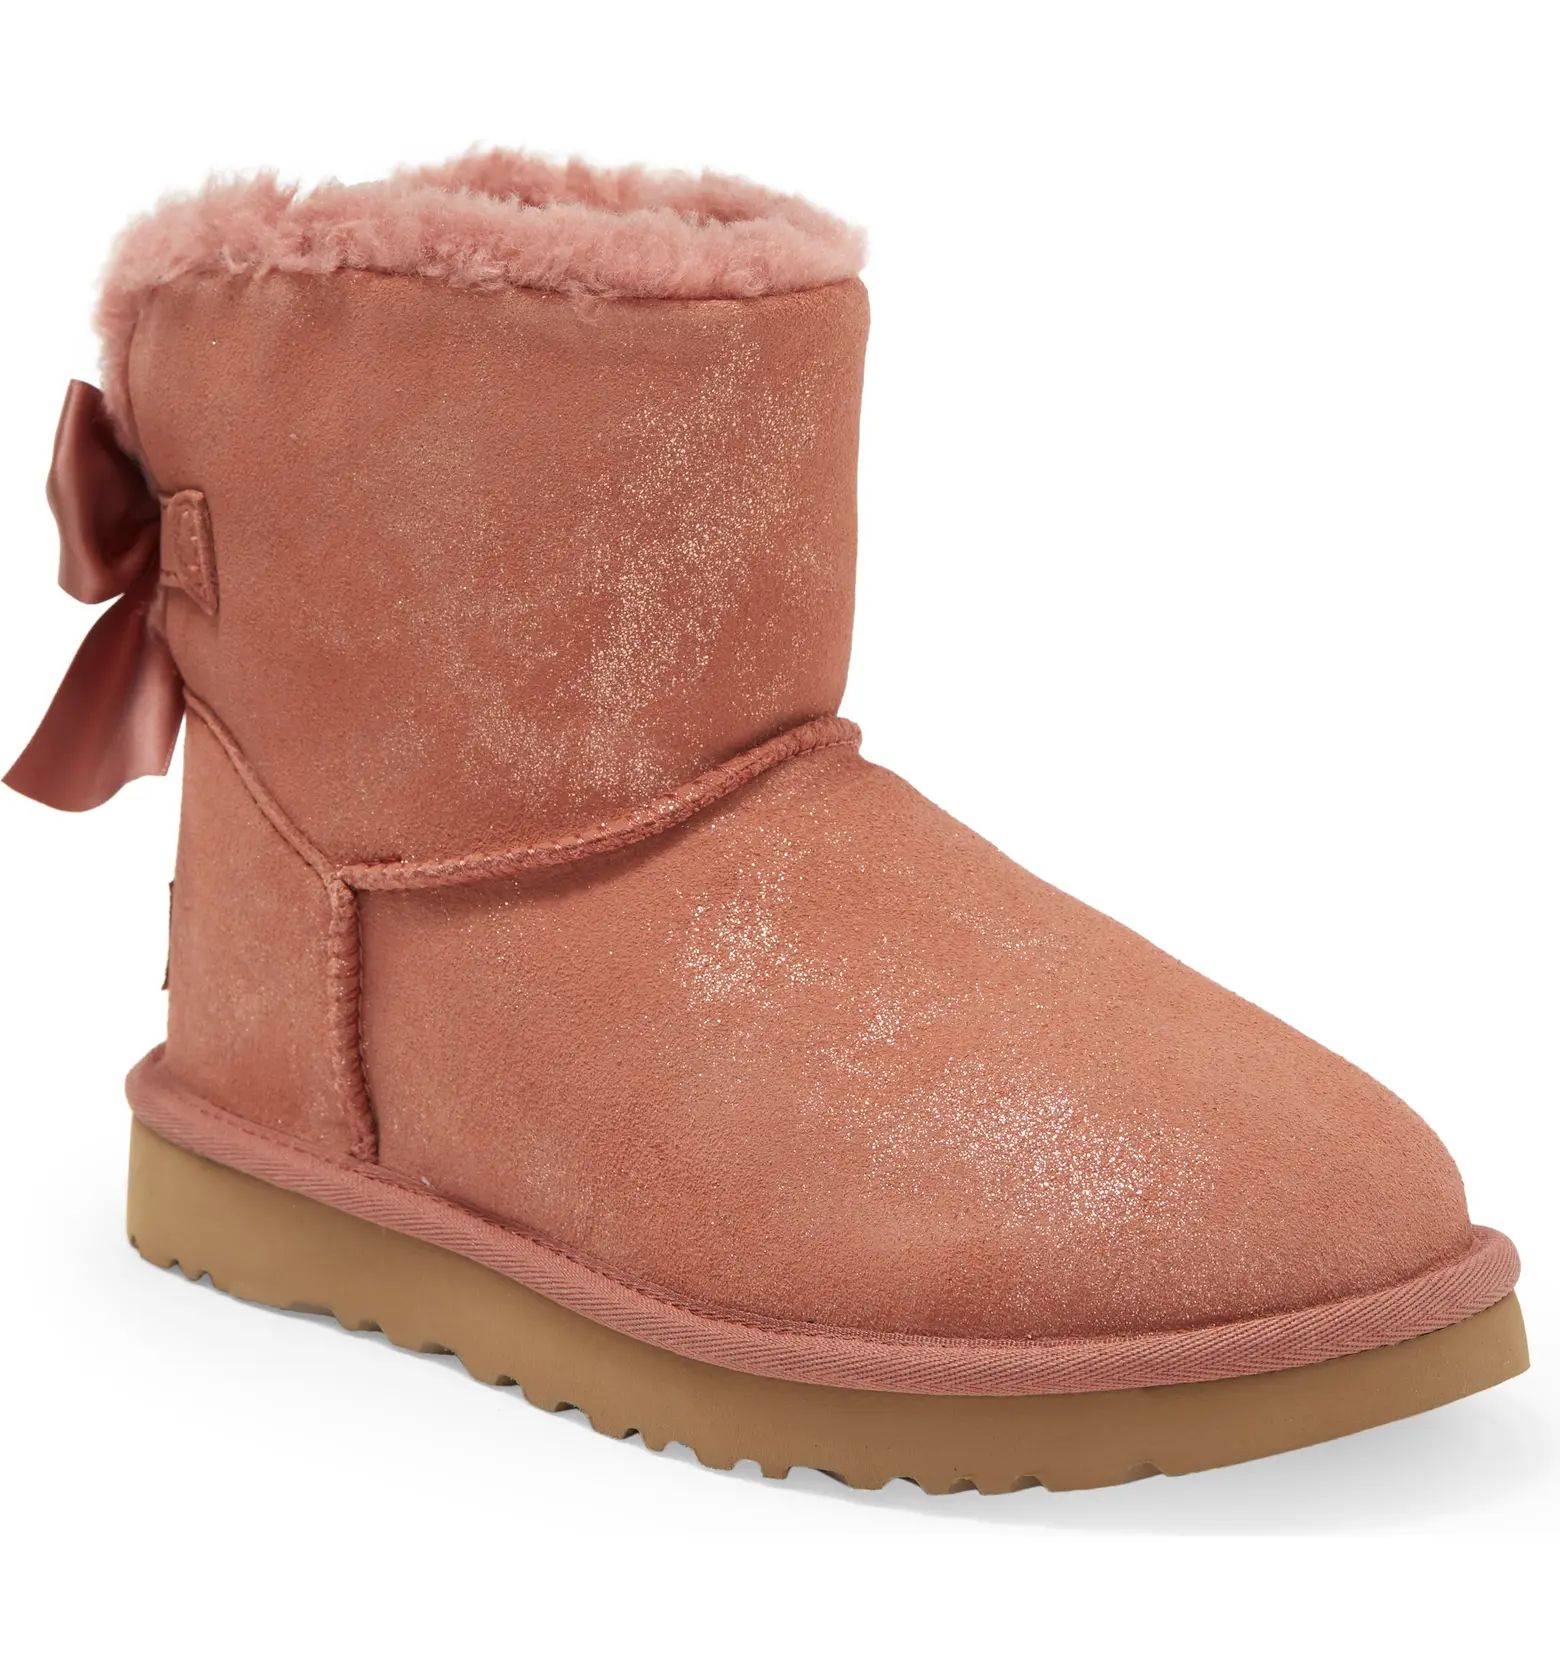 Mini Bailey Bow Glimmer Faux Fur Lined Boot | Nordstrom Rack